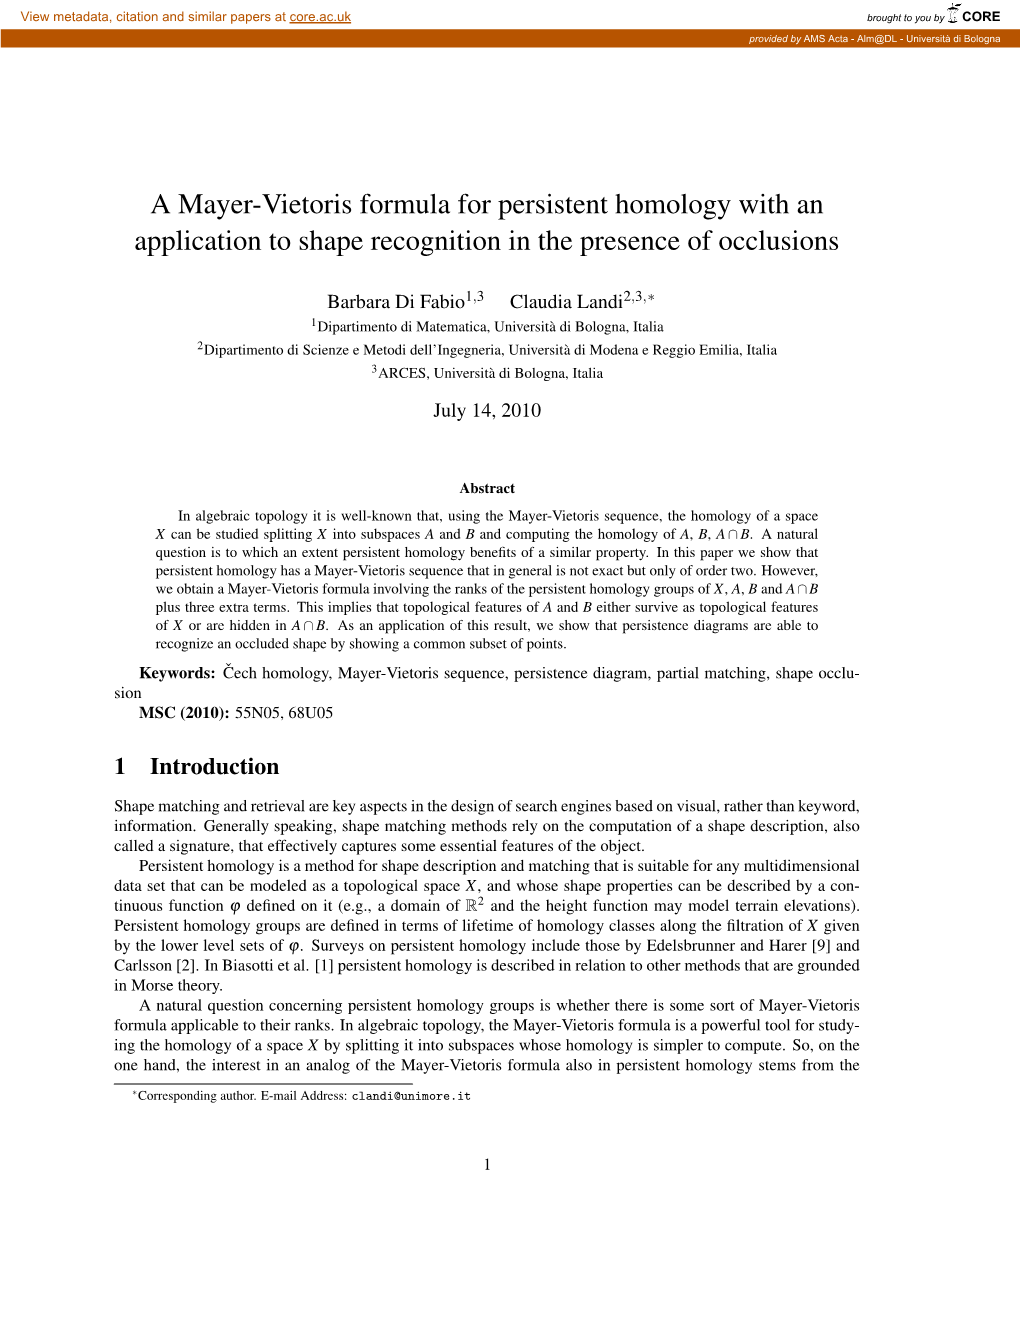 A Mayer-Vietoris Formula for Persistent Homology with an Application to Shape Recognition in the Presence of Occlusions